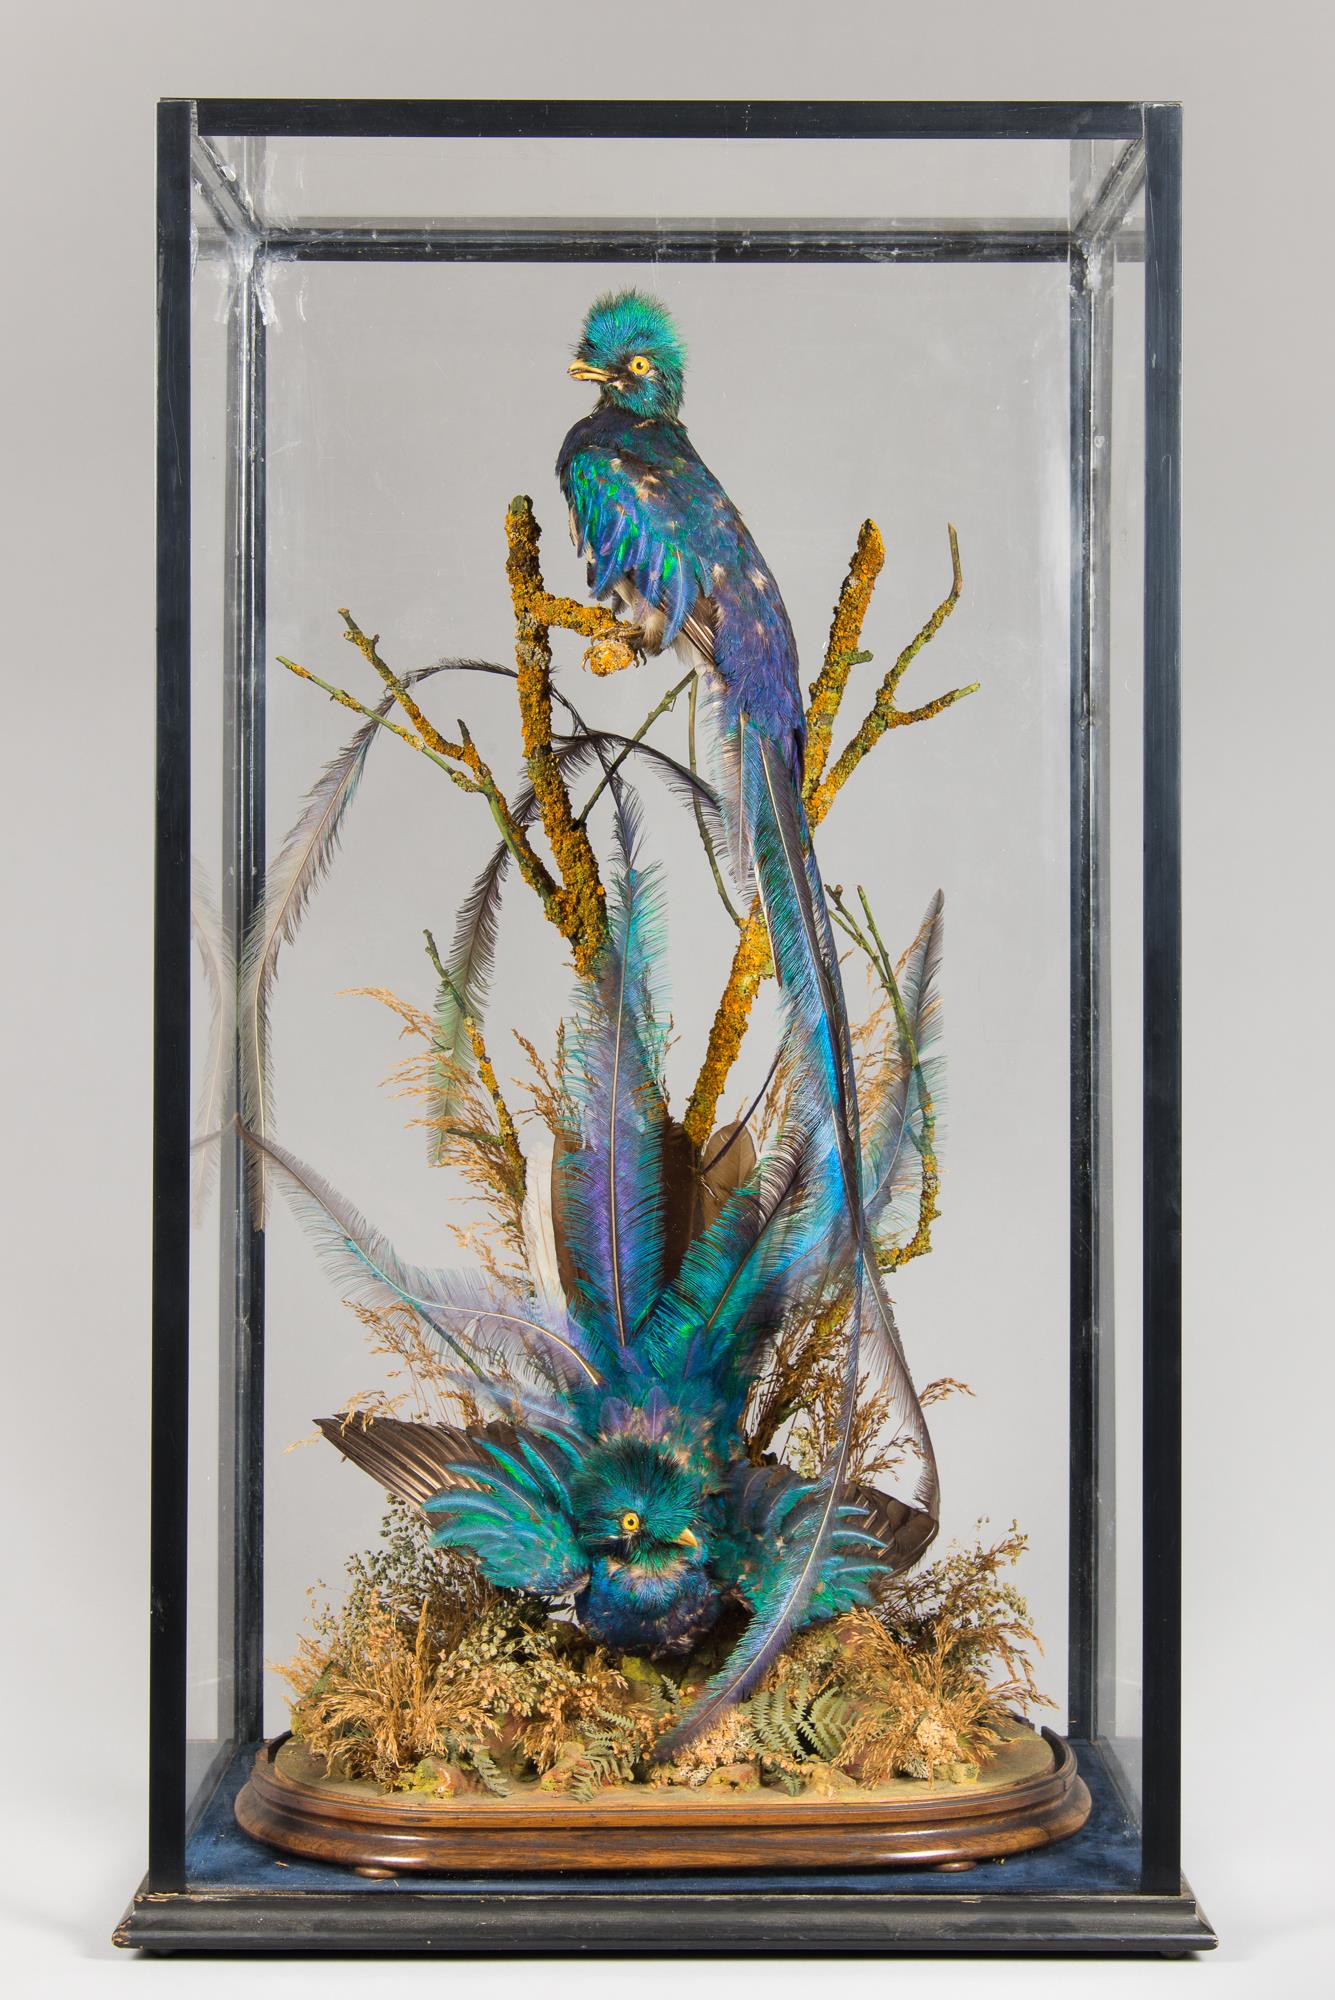 A LATE 19TH CENTURY TAXIDERMY DIORAMA OF QUETZALS (PHAROMACHRUS MOCINNO). With original dome base